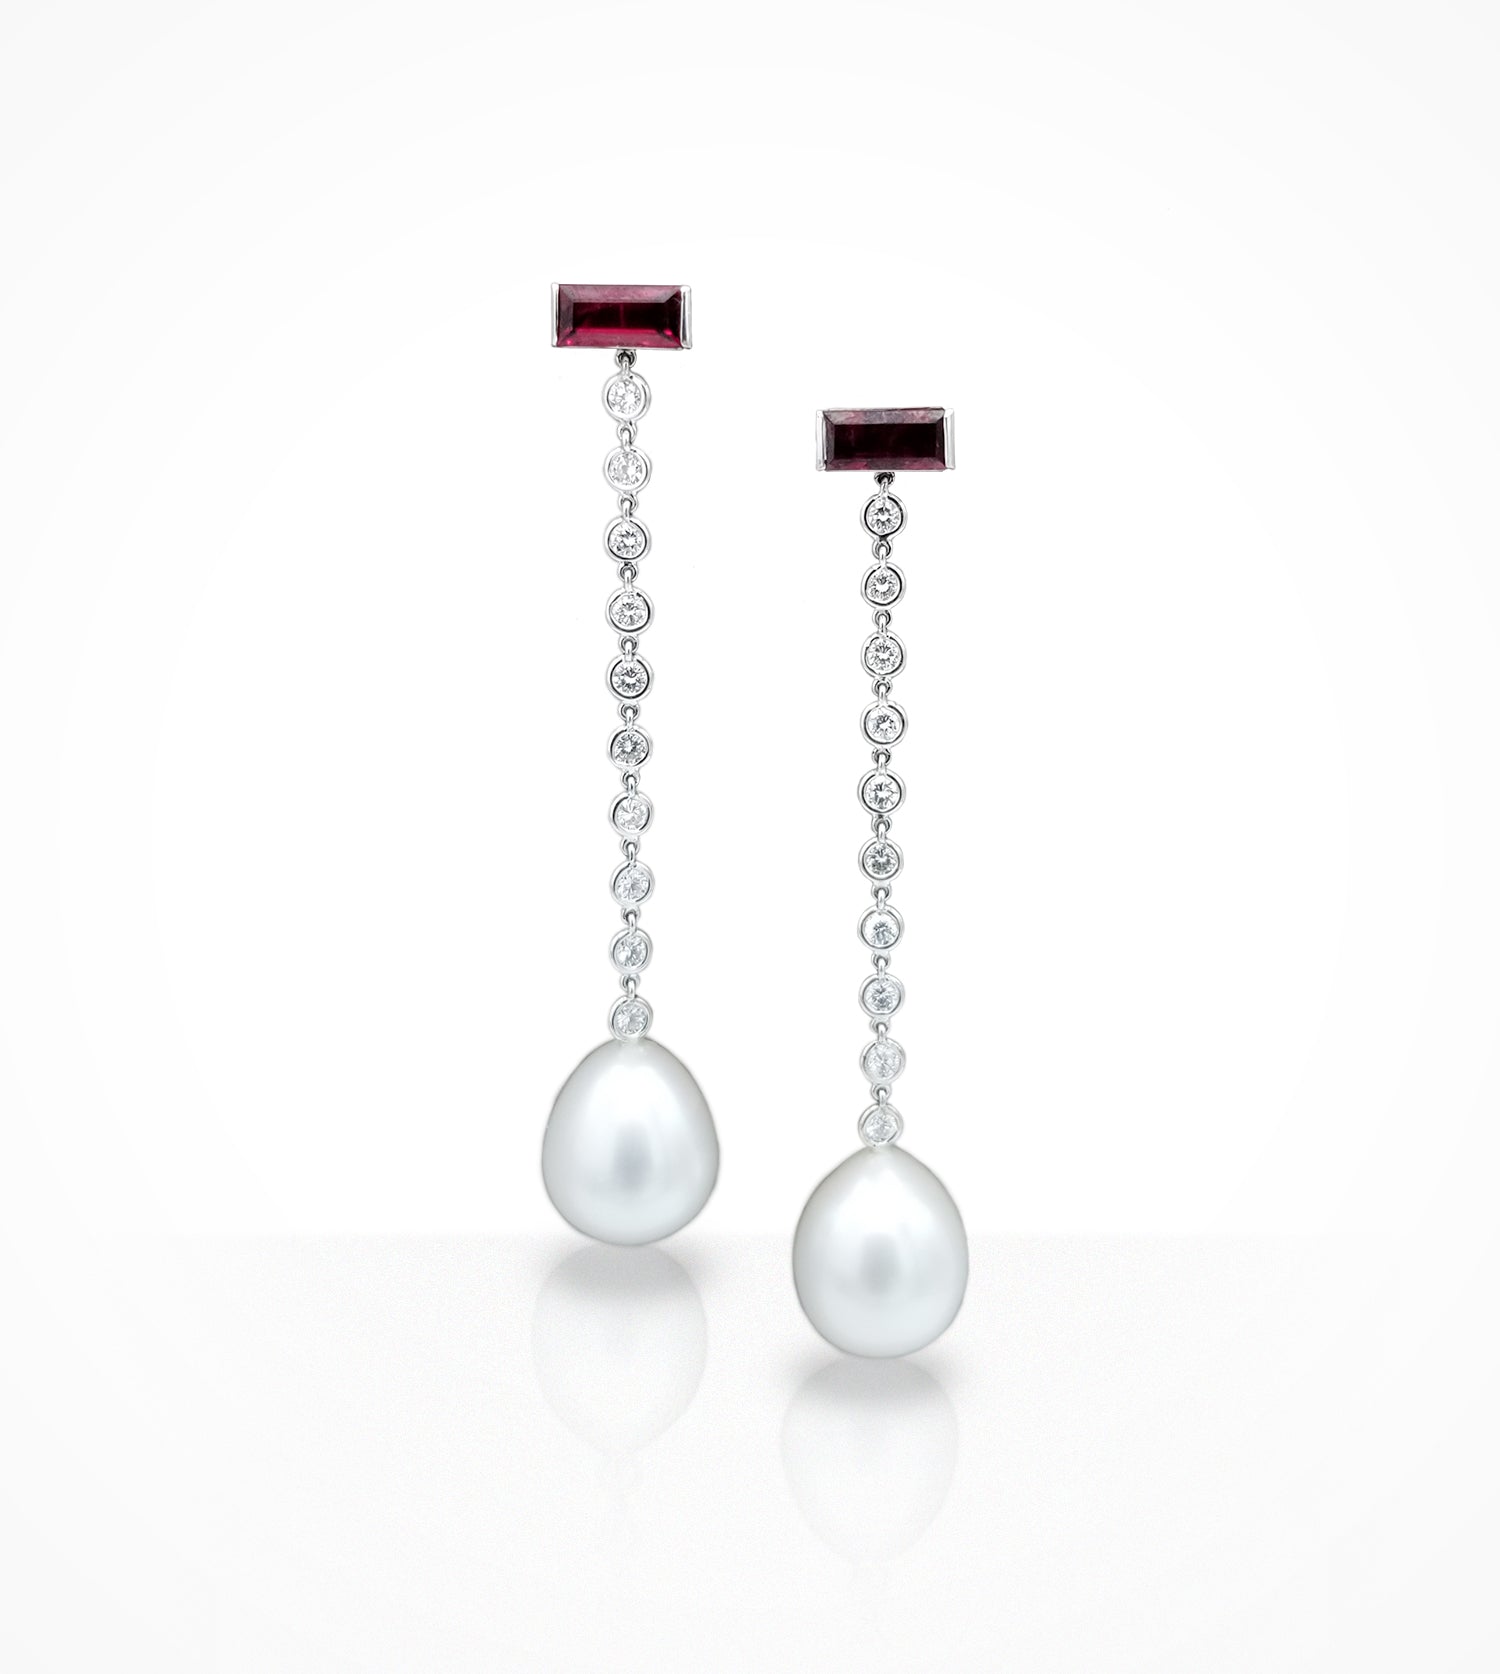 1100239 Estate 18KW ruby, diamond and south Sea pearl drop earrings, 2rubies=2.00cts, 20diamonds=0.88cts f-g, vsi-si, pearls=12.1mm